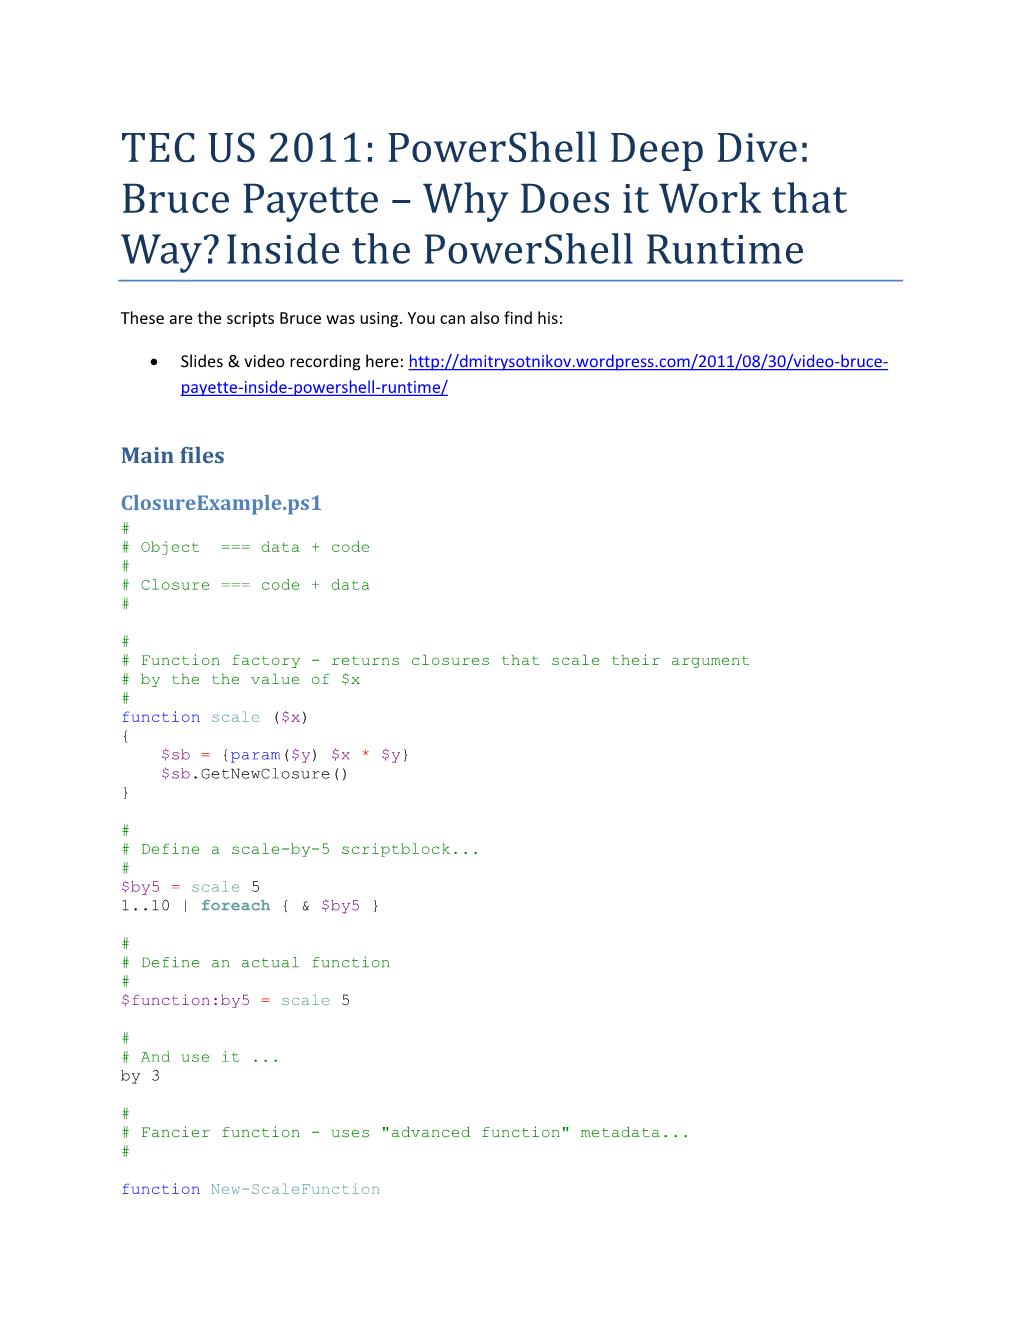 TEC US 2011: Powershell Deep Dive: Bruce Payette – Why Does It Work That